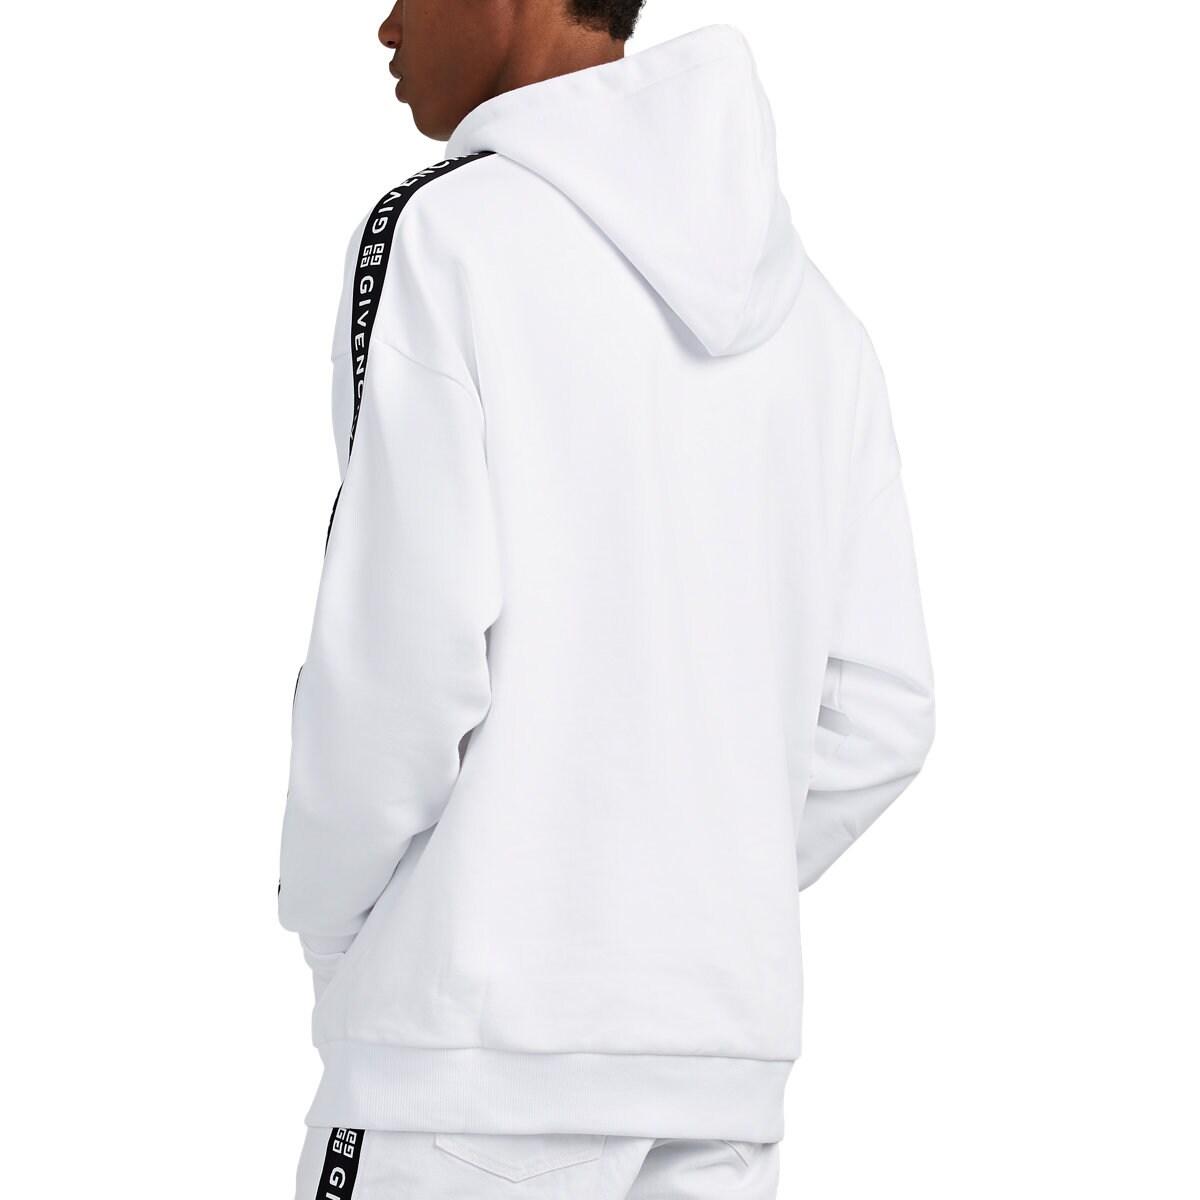 Givenchy Logo-detailed Cotton Hoodie in White for Men - Lyst